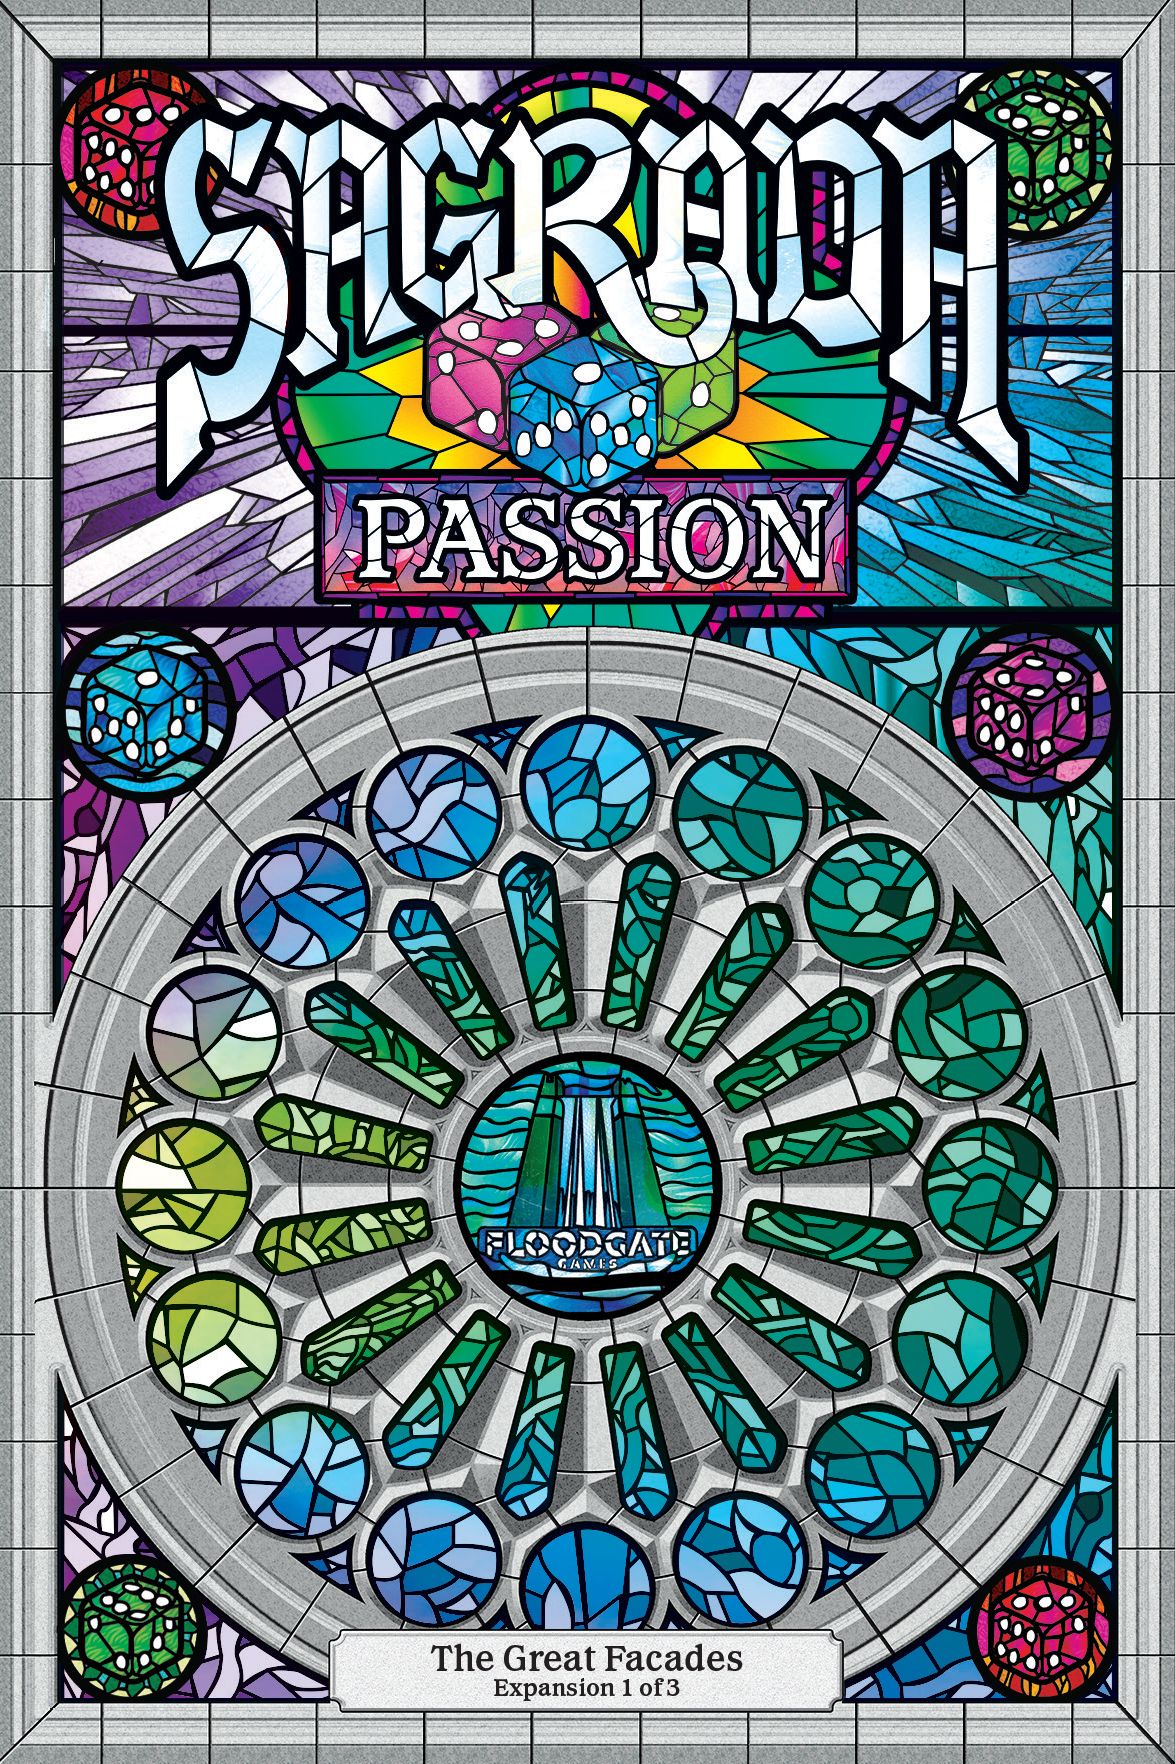 Sagrada: The Great Facade - Passion Expansion | L.A. Mood Comics and Games